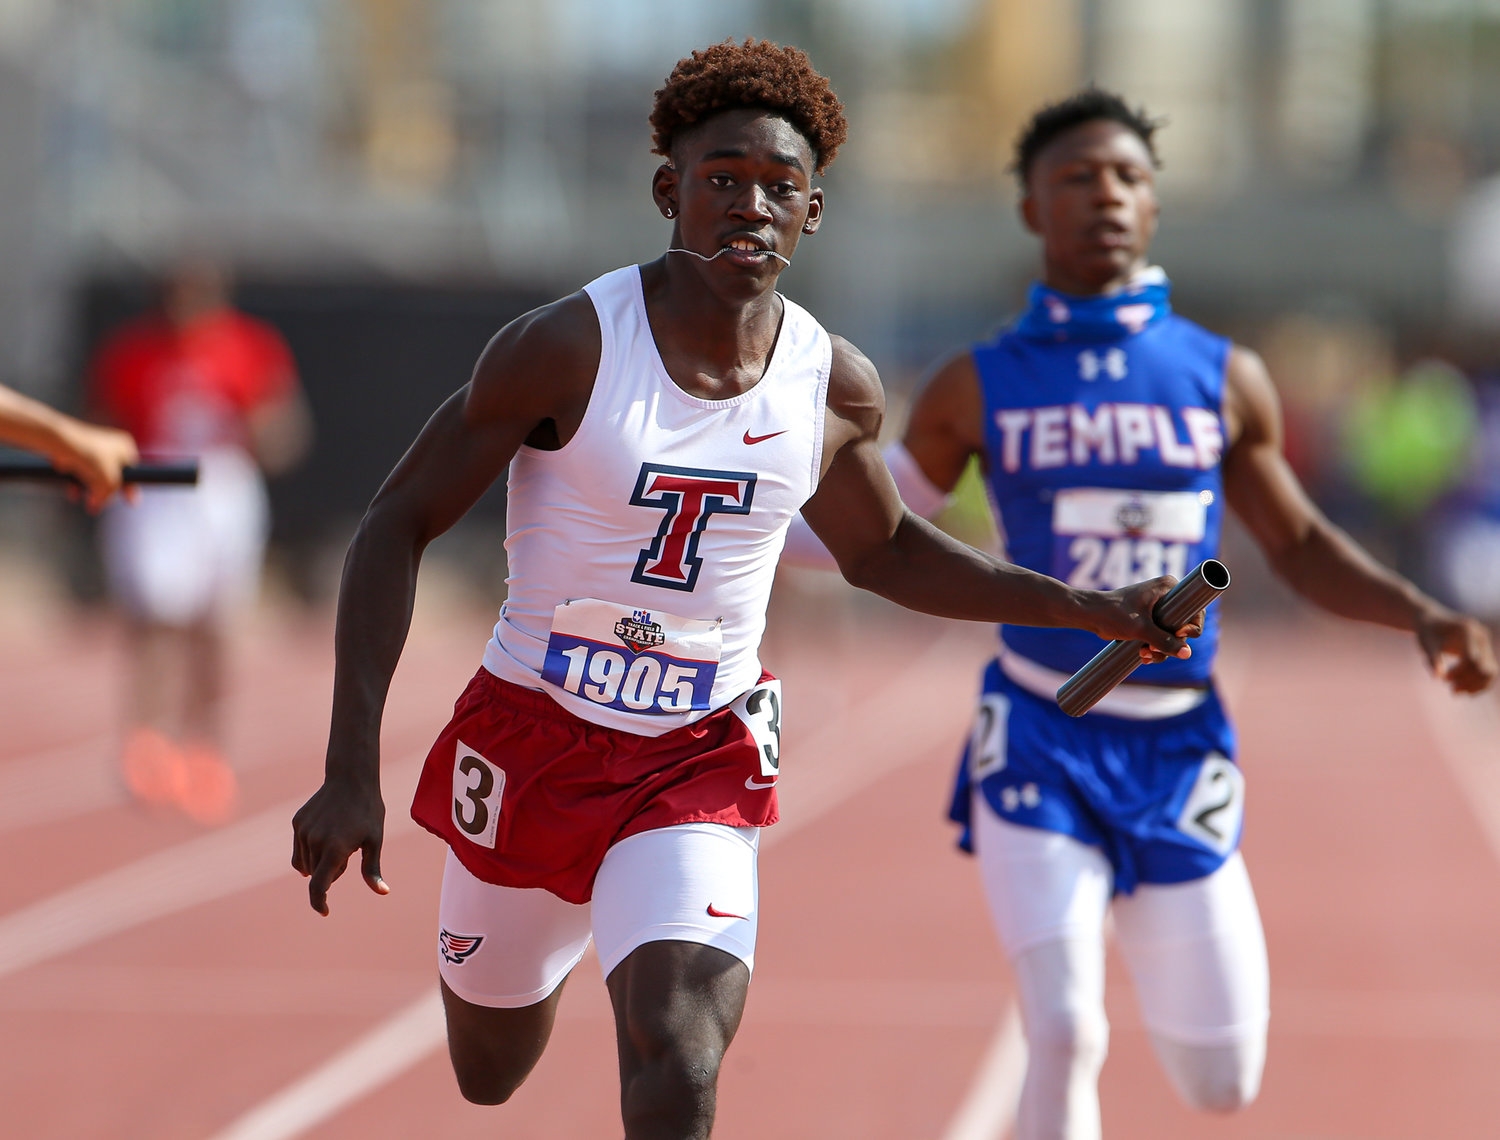 The Tompkins High School relay team competes in the Class 6A boys 4x100 meter relay event during the UIL State Track and Field Meet on May 8, 2021 at Mike A. Myers Stadium in Austin, Texas. The Tompkins team finished second in the event.